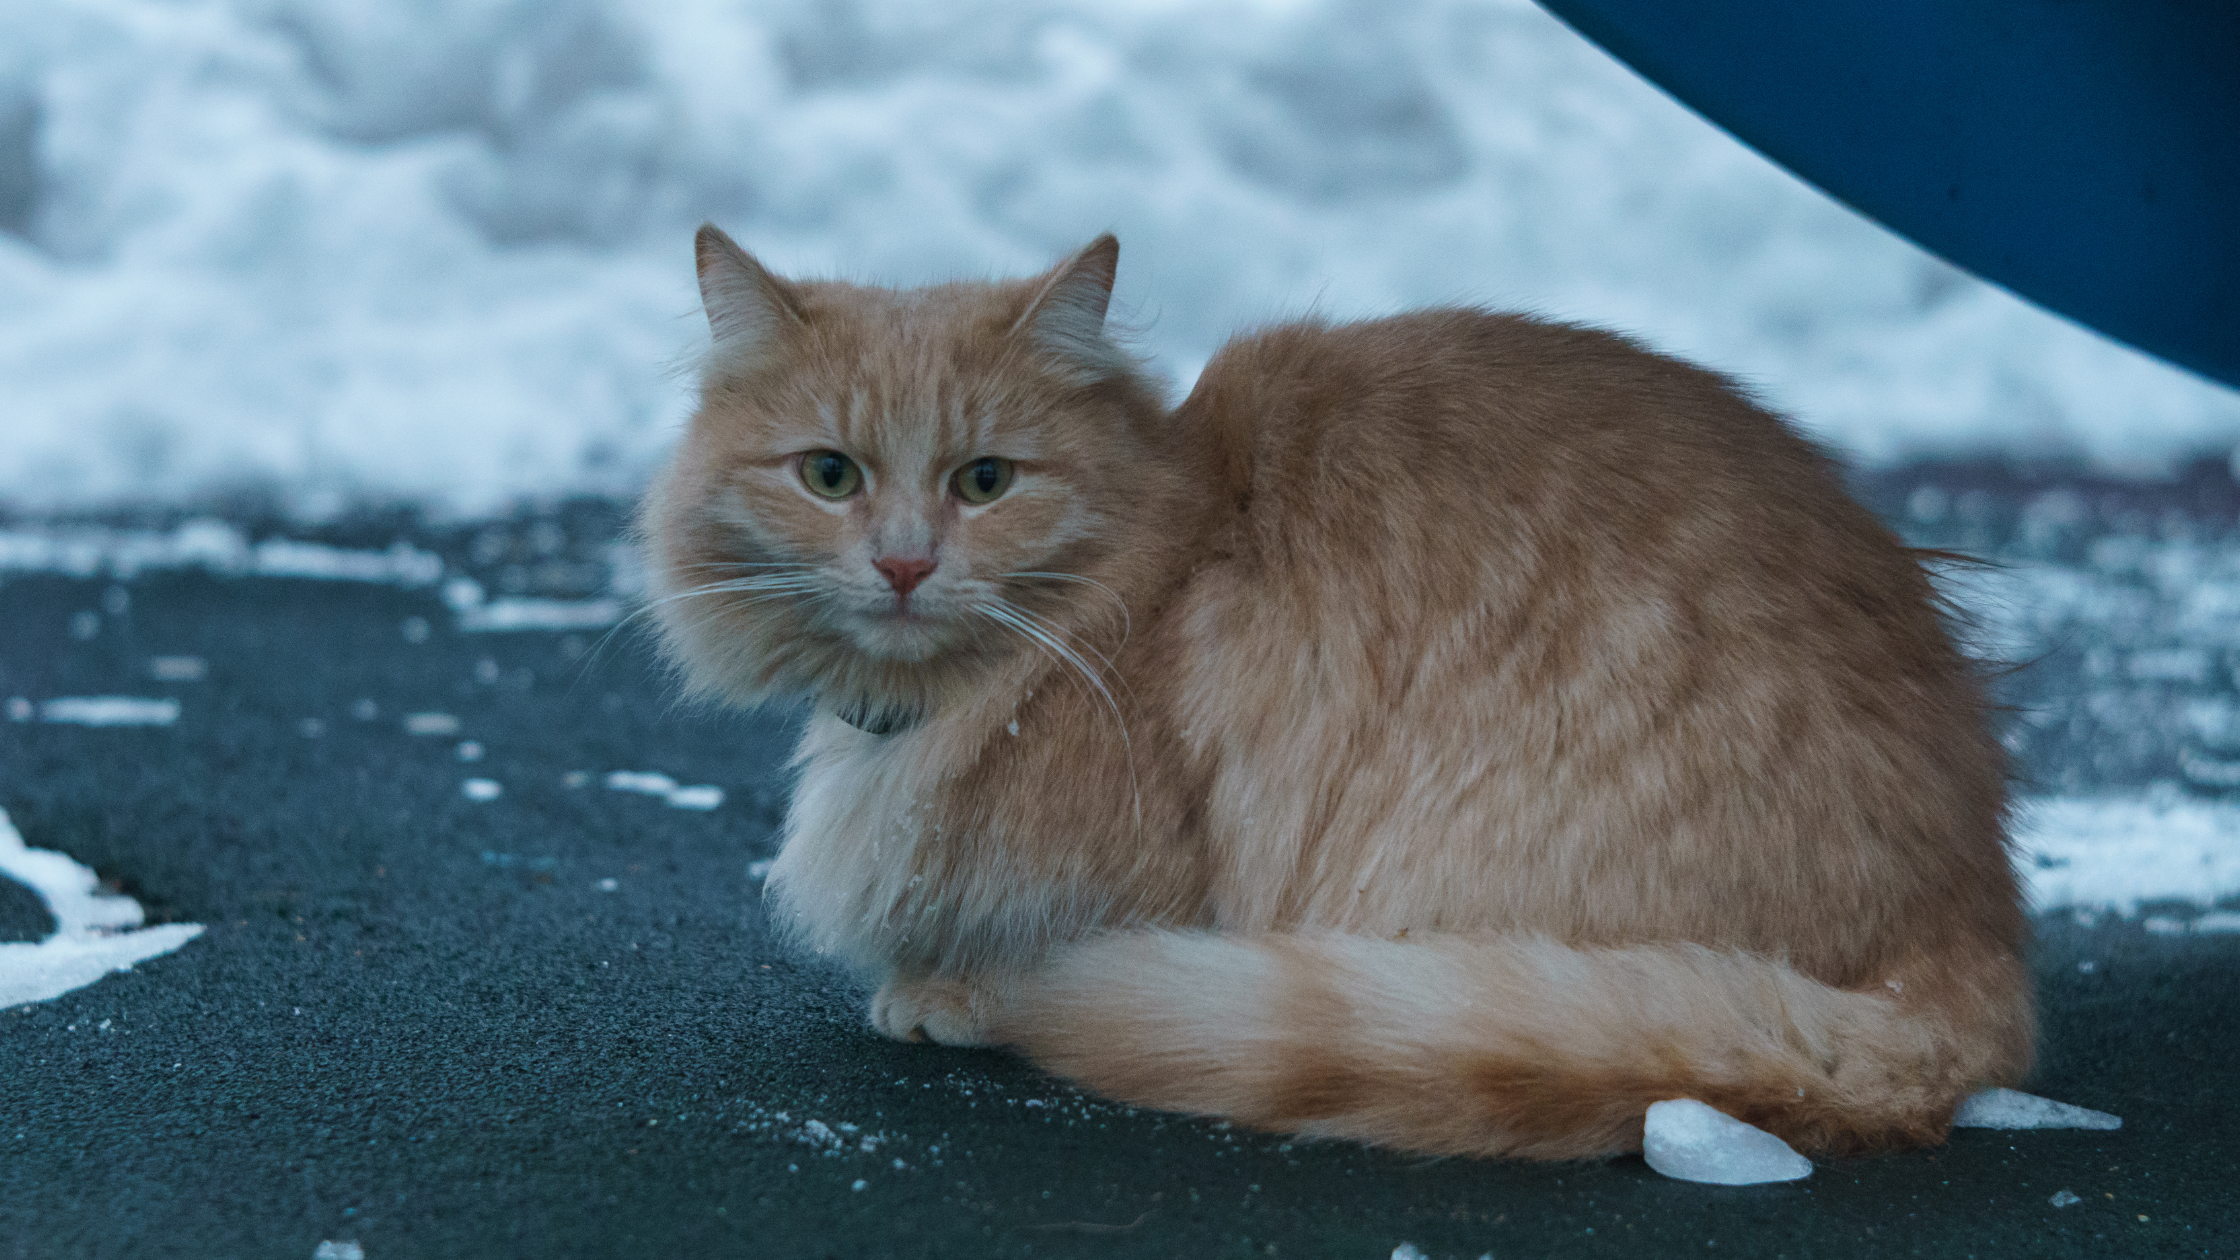 Other Winter Safety Tips for Stray Cats